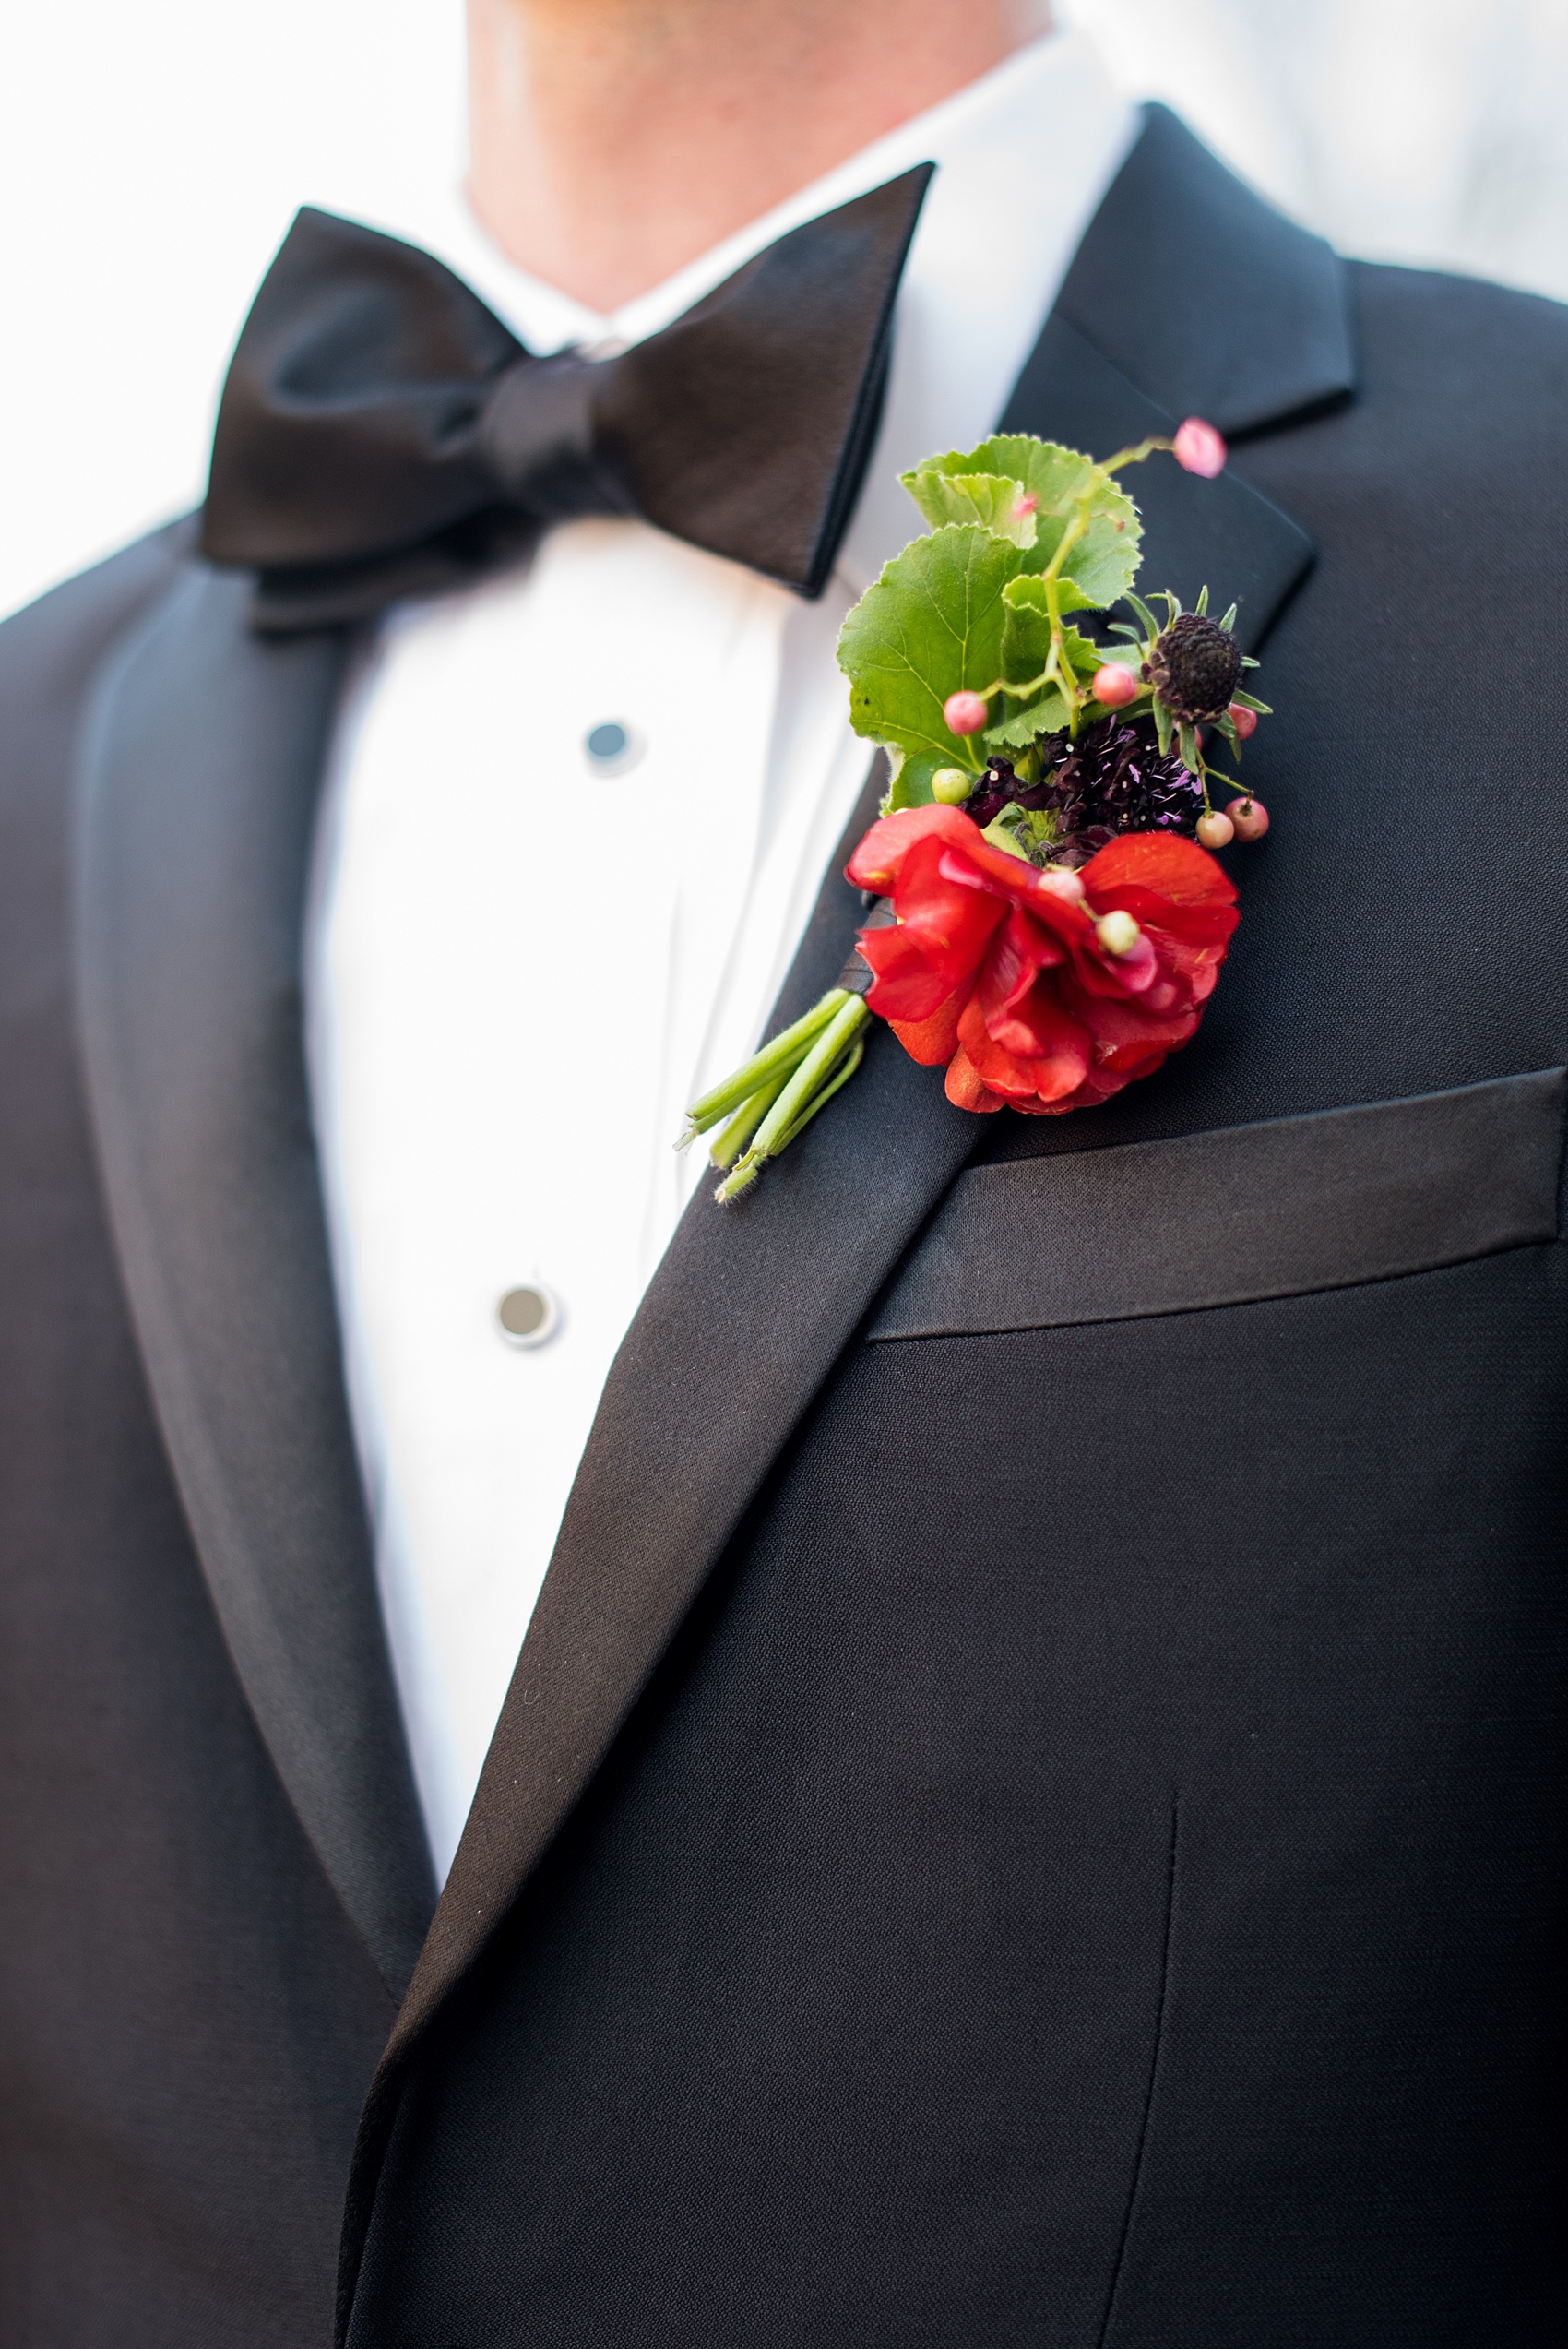 W Hoboken wedding photos by Mikkel Paige Photography. Picture of a deep red/burgundy boutonniere on one of the groomsman by Sachi Rose Designs, including ranunculus, geranium leaves and cosmos. #mikkelpaige #HobokenWedding #NewJerseyPhotographer #NewYorkCityPhotographer #NYCweddingphotographer #brideandgroomphotos #redpeonies #romanticwedding #springwedding #CityWedding